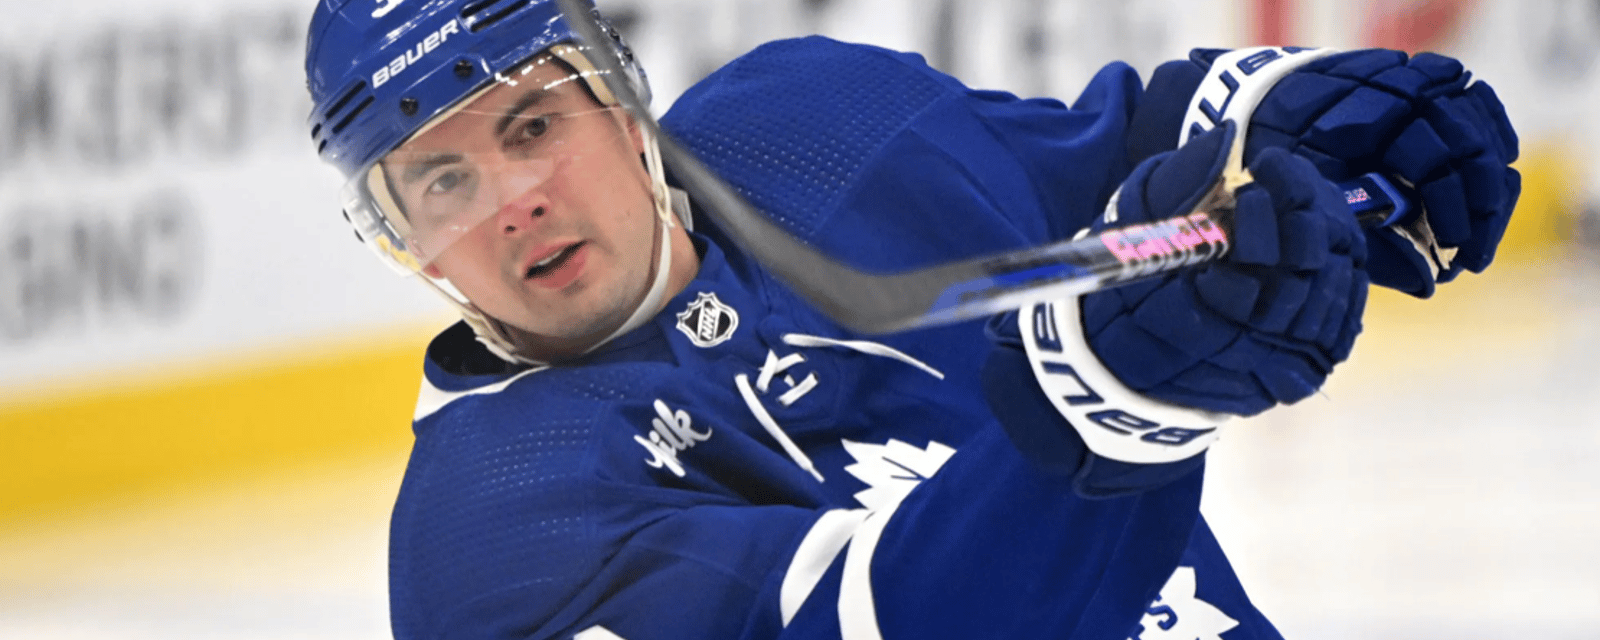 Justin Holl takes a shot at the Maple Leafs 